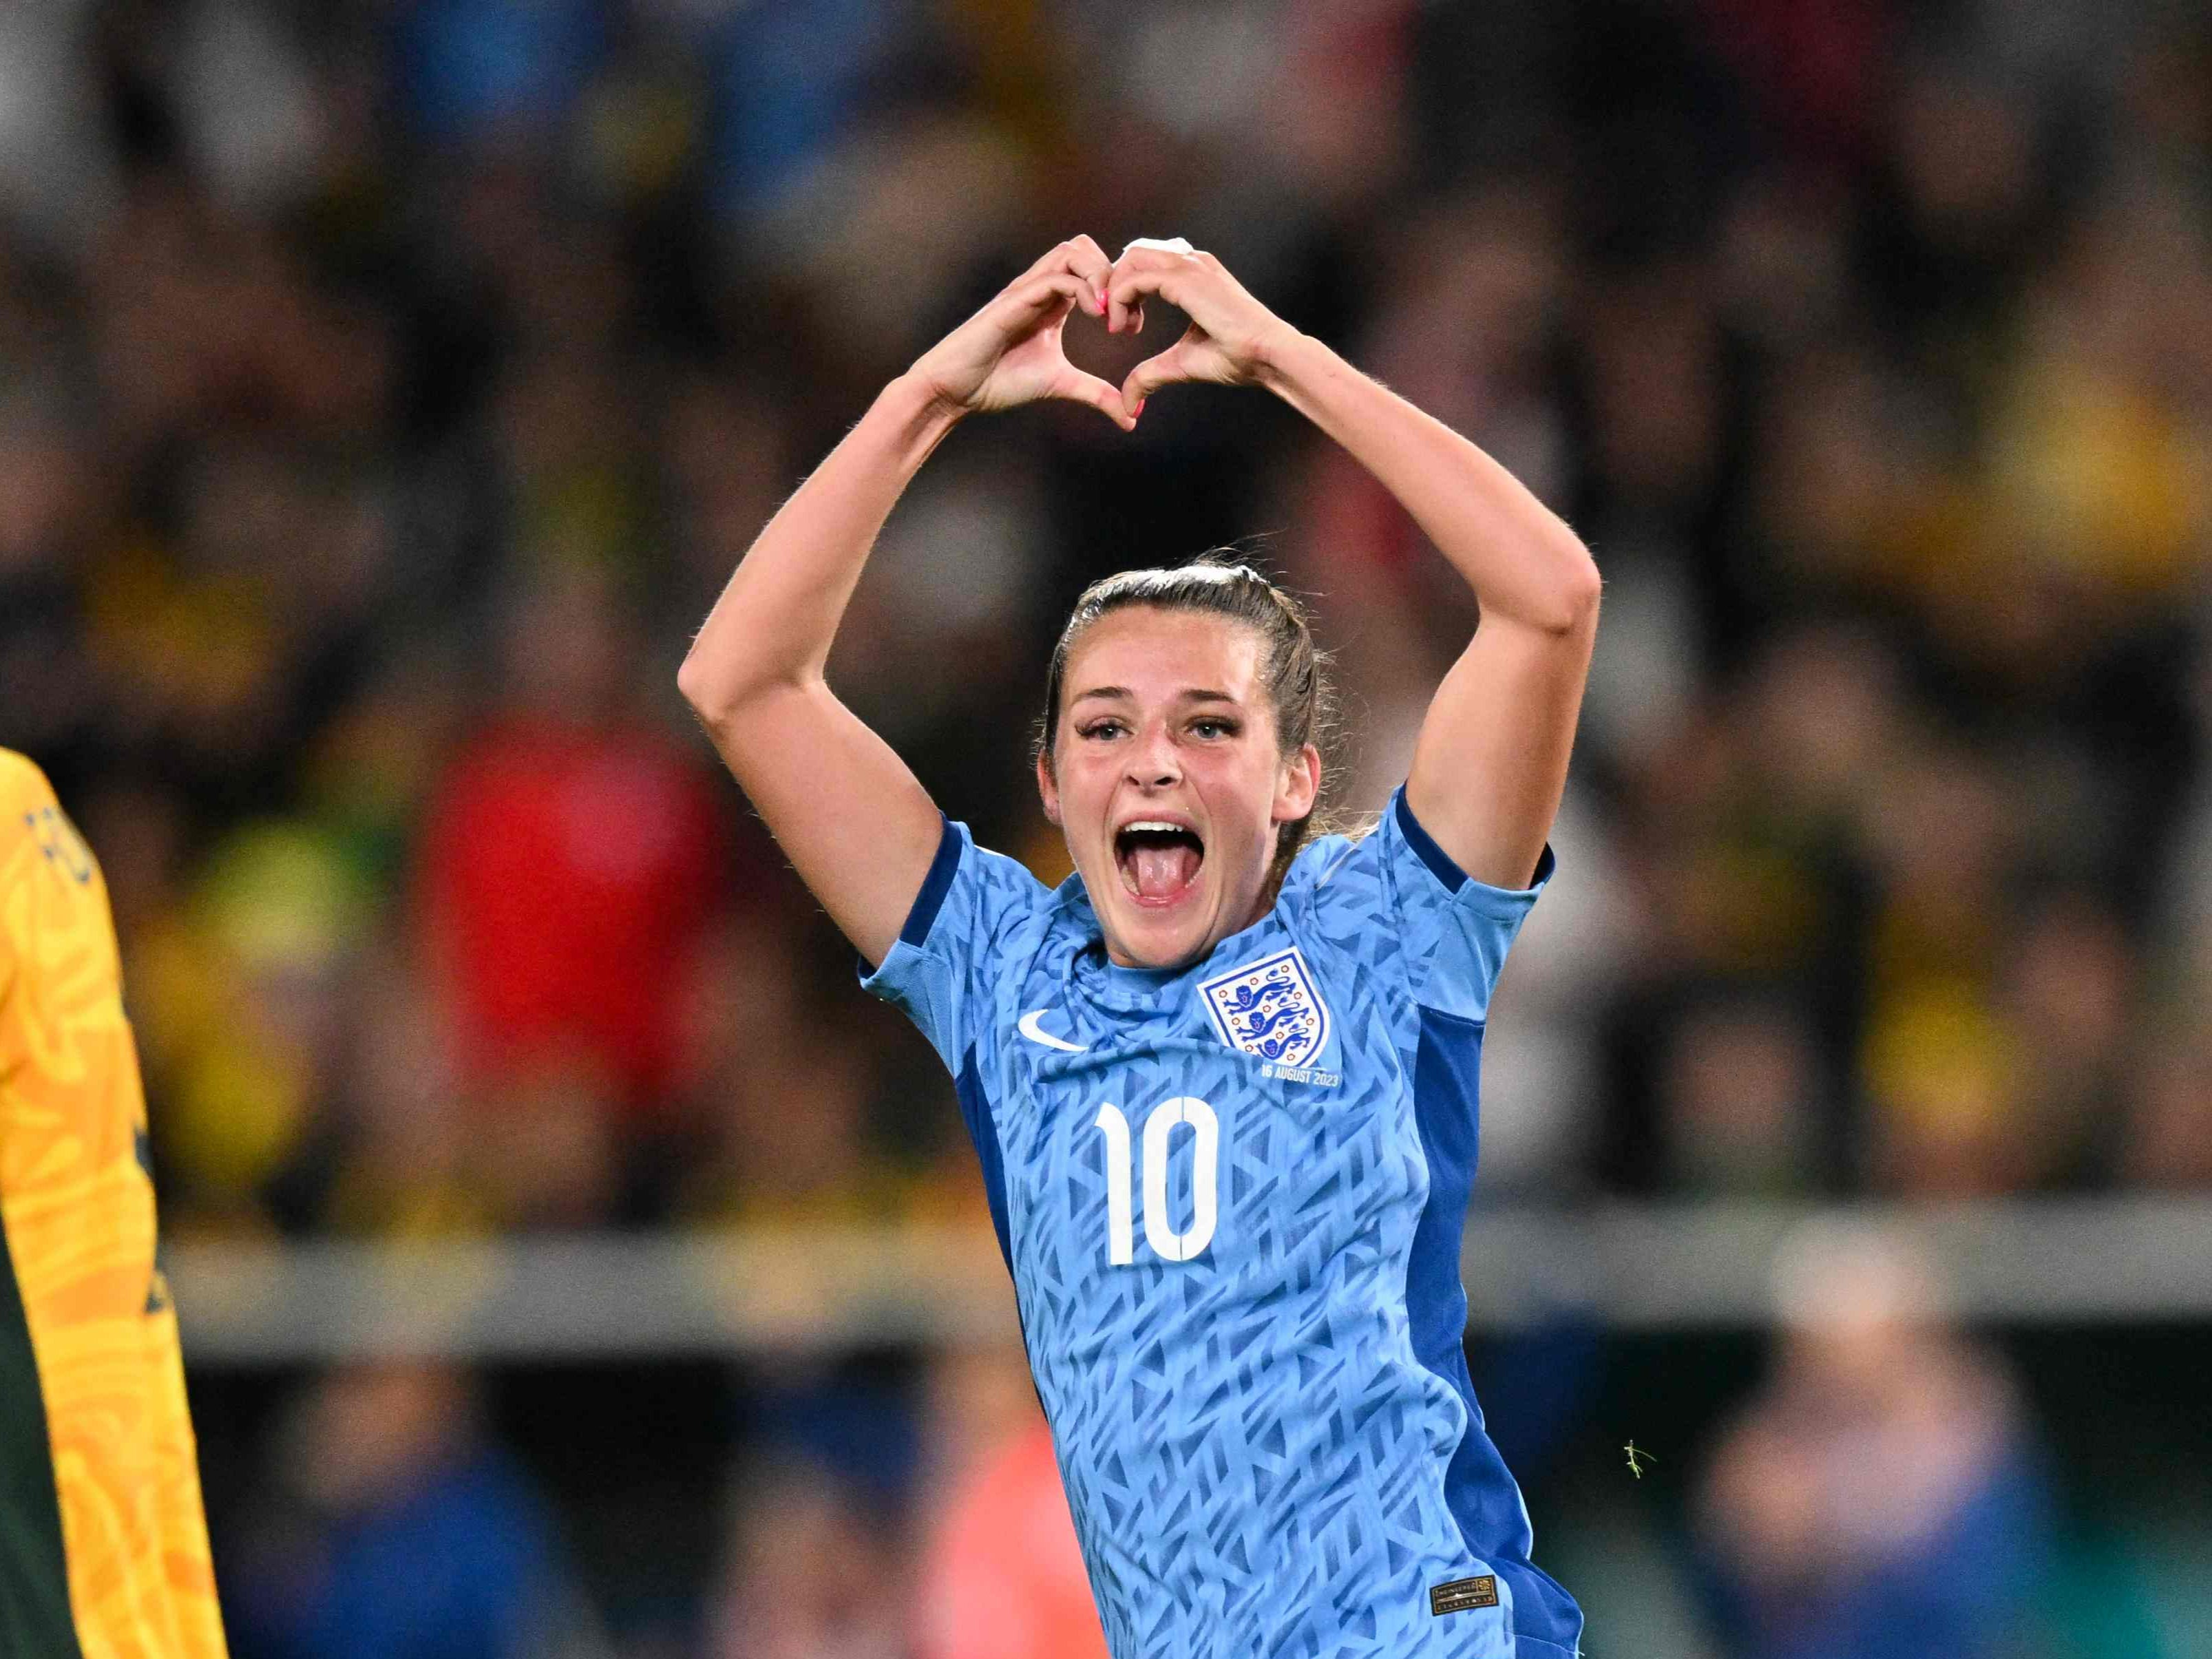 England midfielder Toone celebrates giving her side the lead